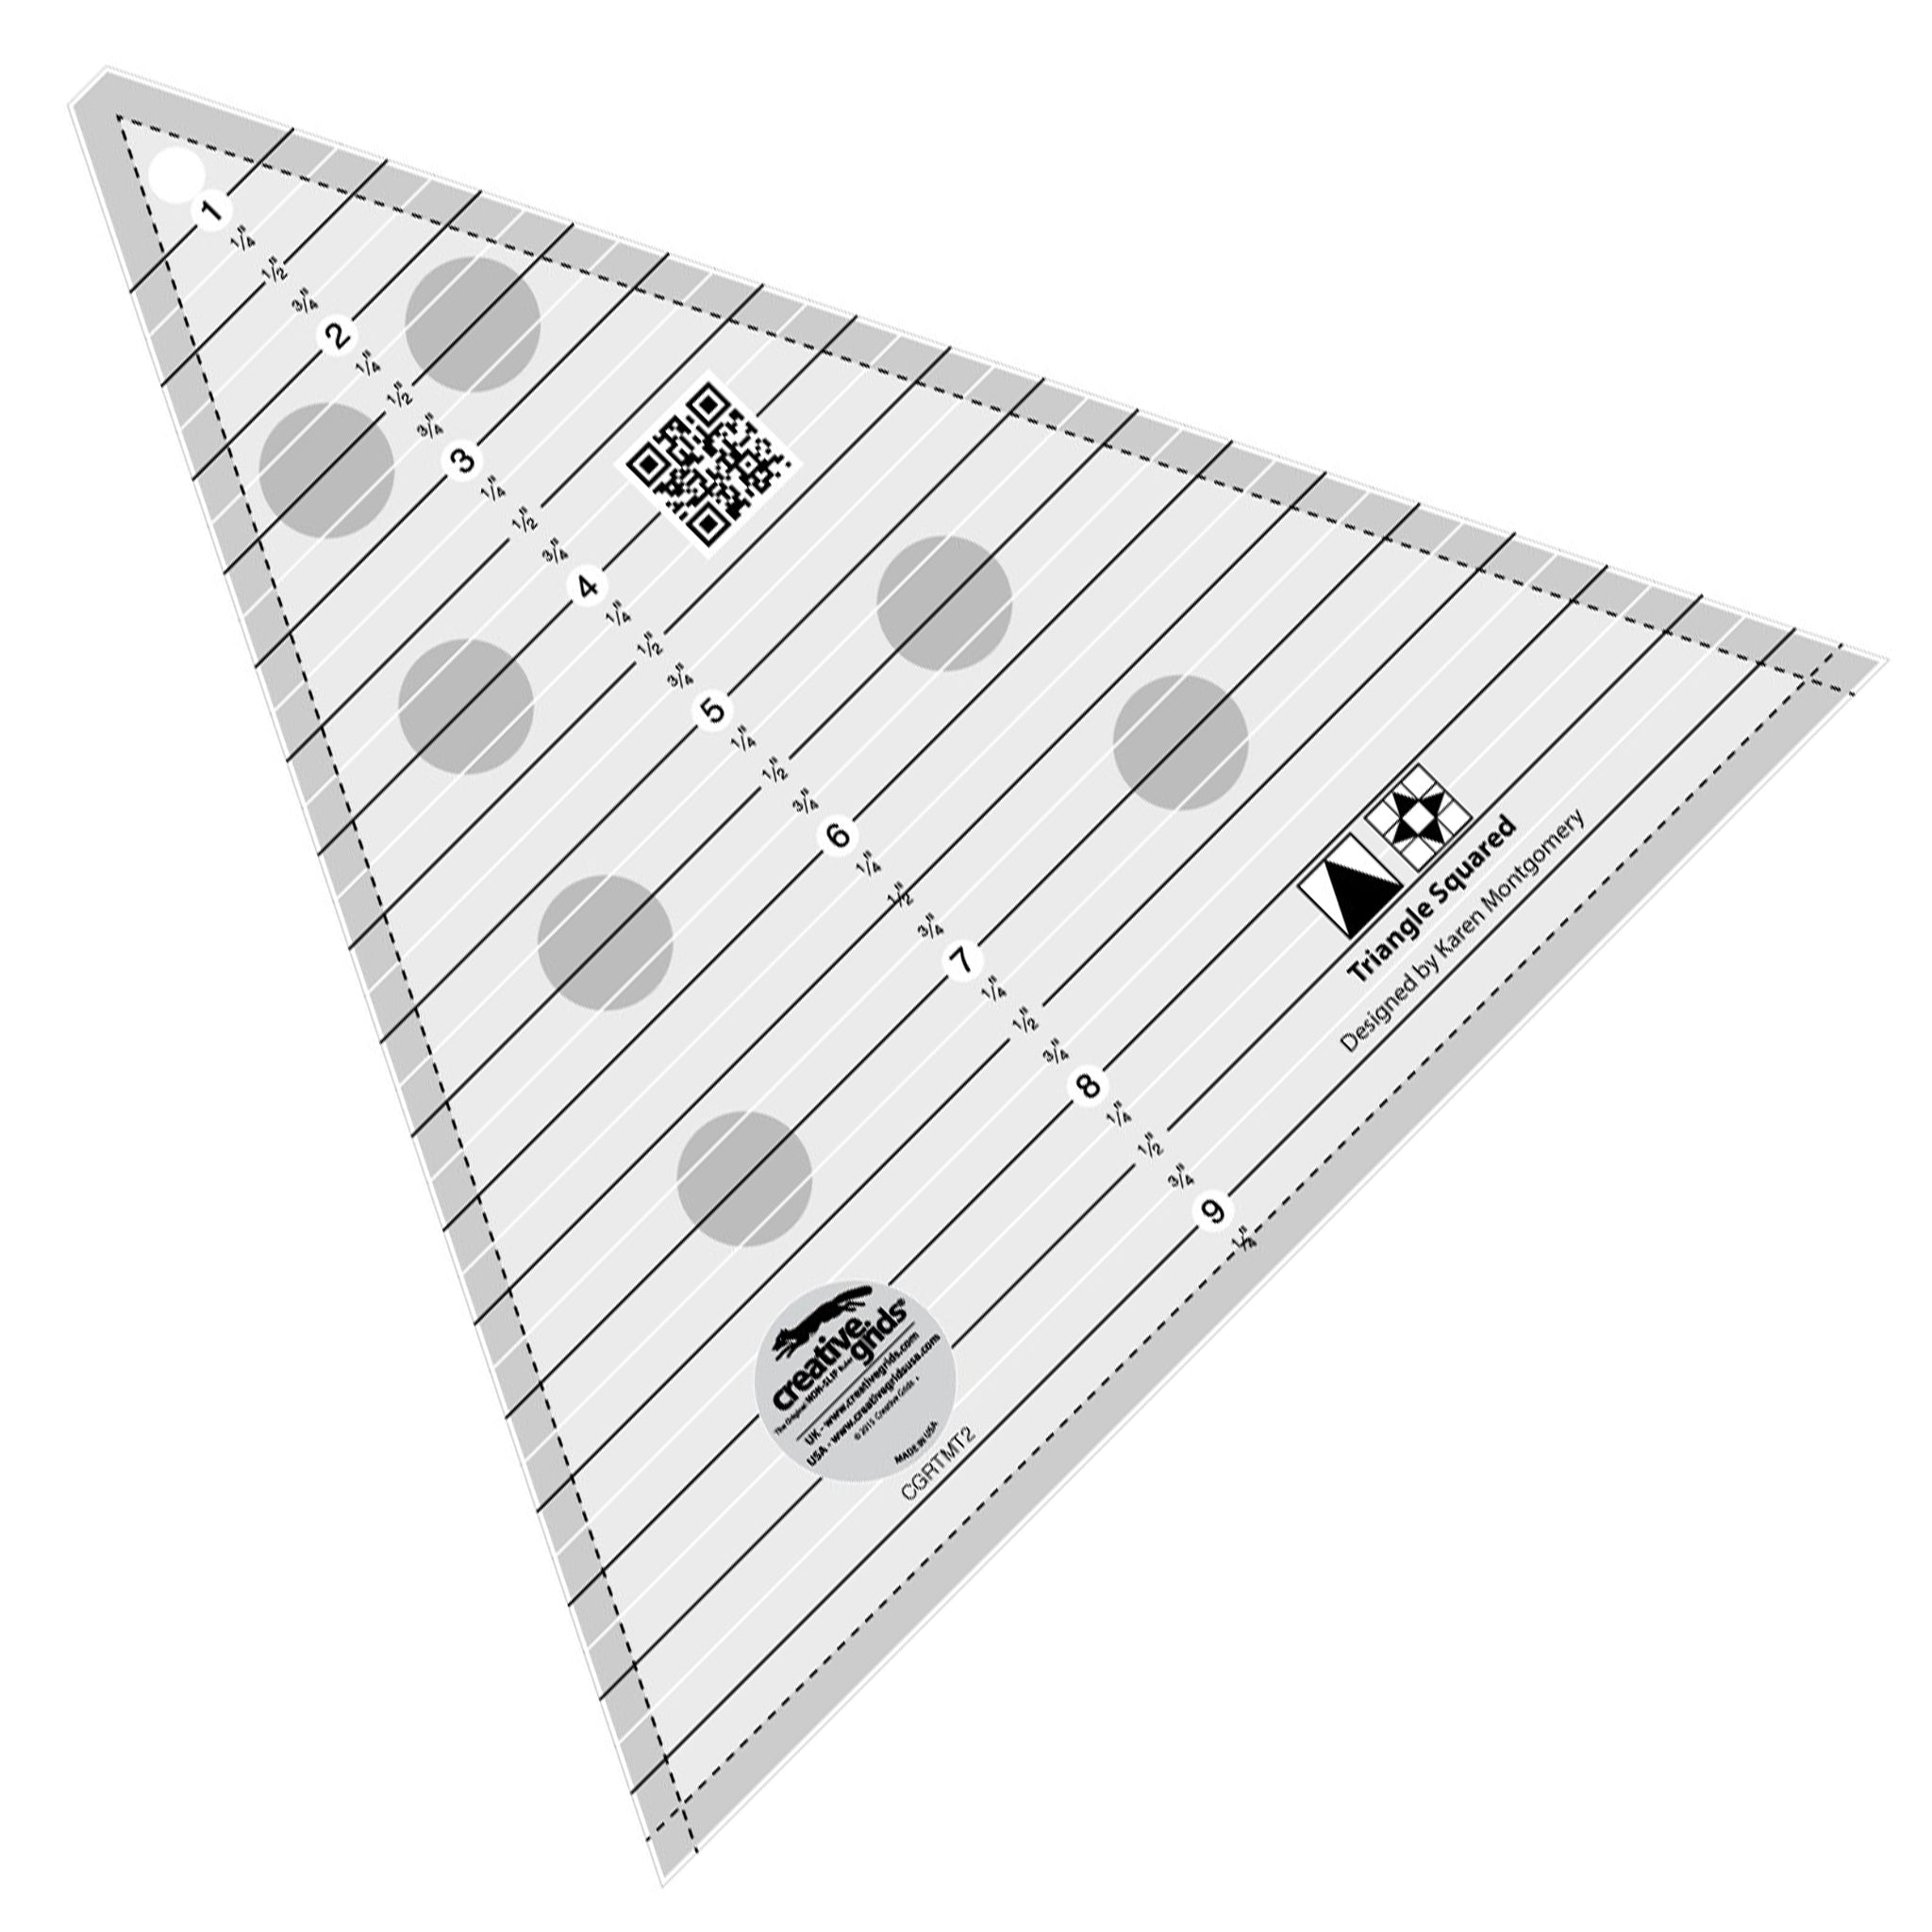 Creative Grids Triangle Squared Quilt Ruler (CGRTMT2)